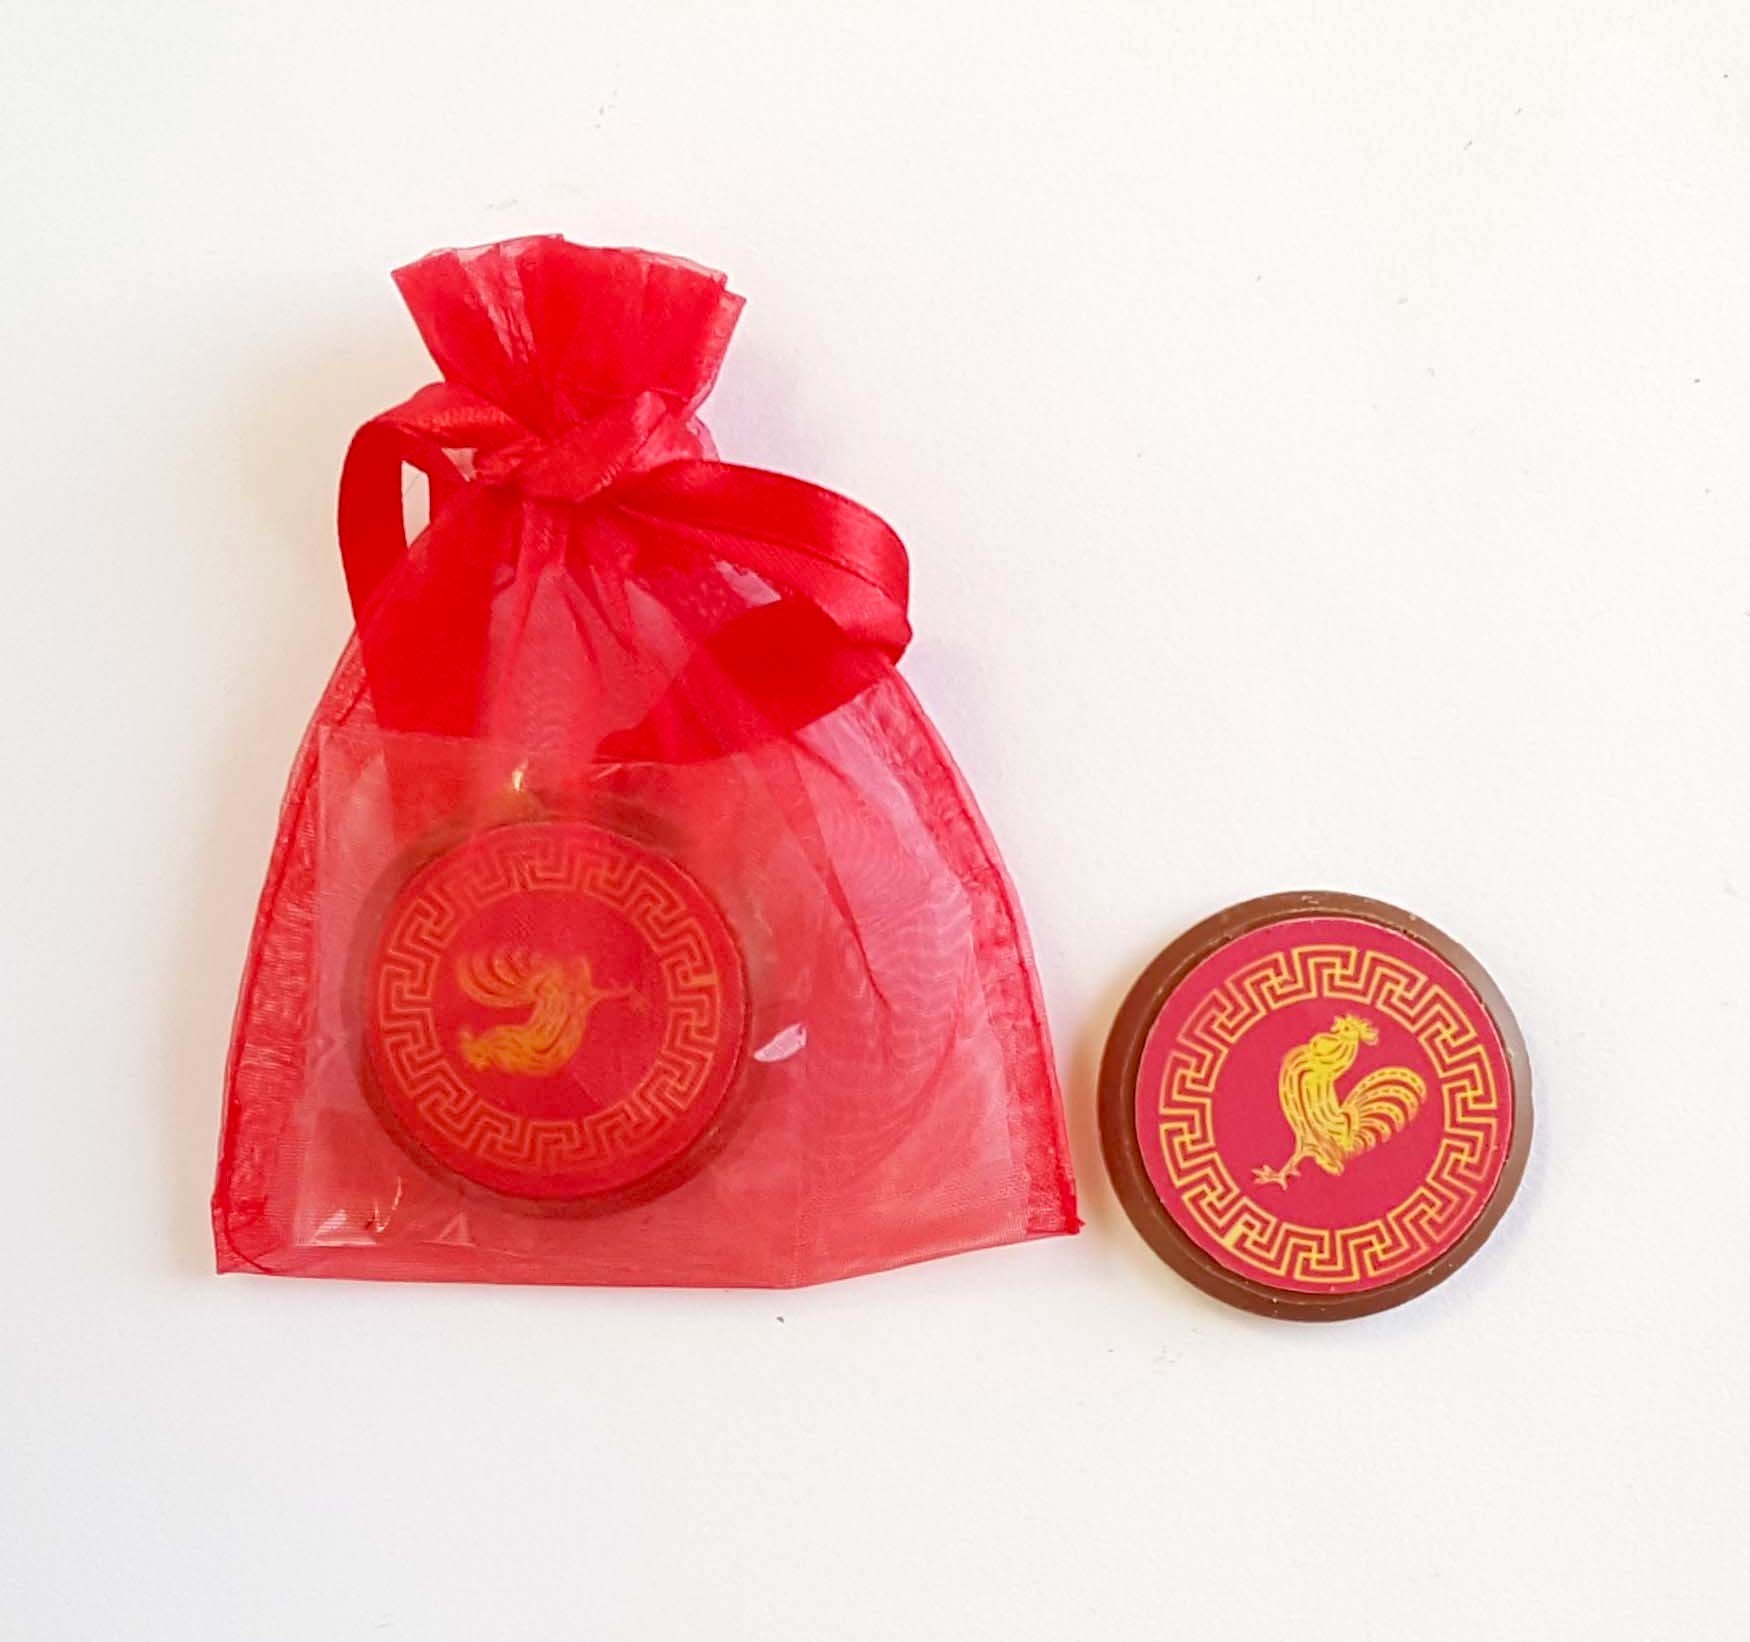 Chocolate coins in organza bag